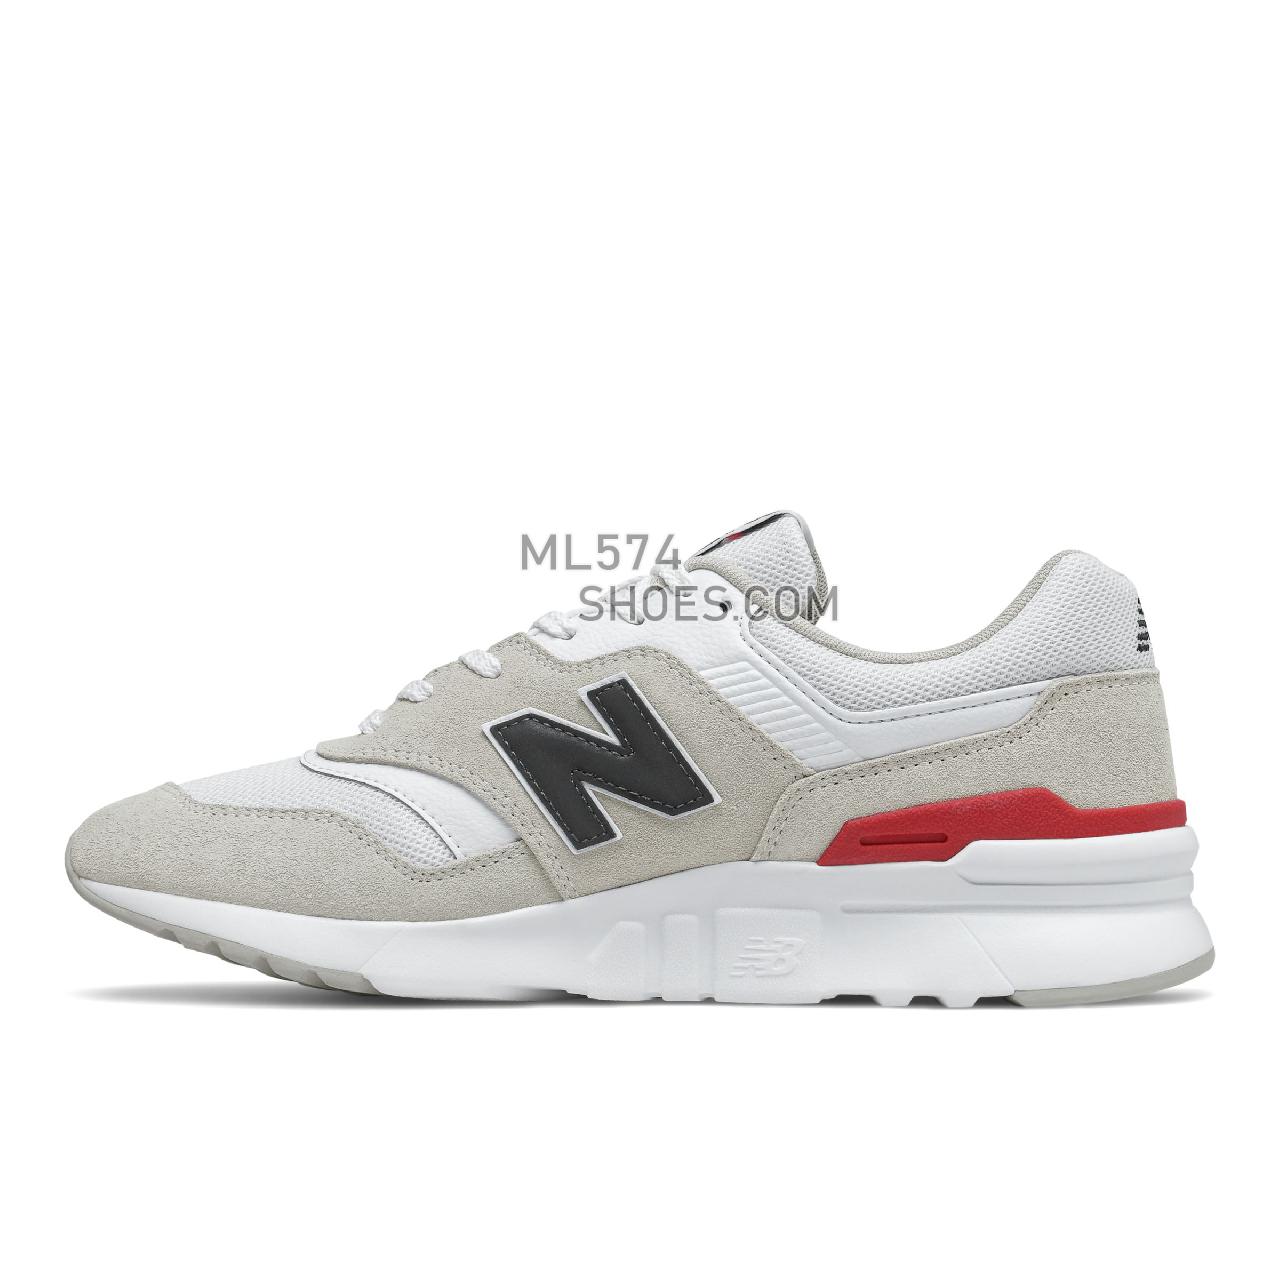 New Balance 997H - Men's Classic Sneakers - Nb White with Team Red - CM997HVW